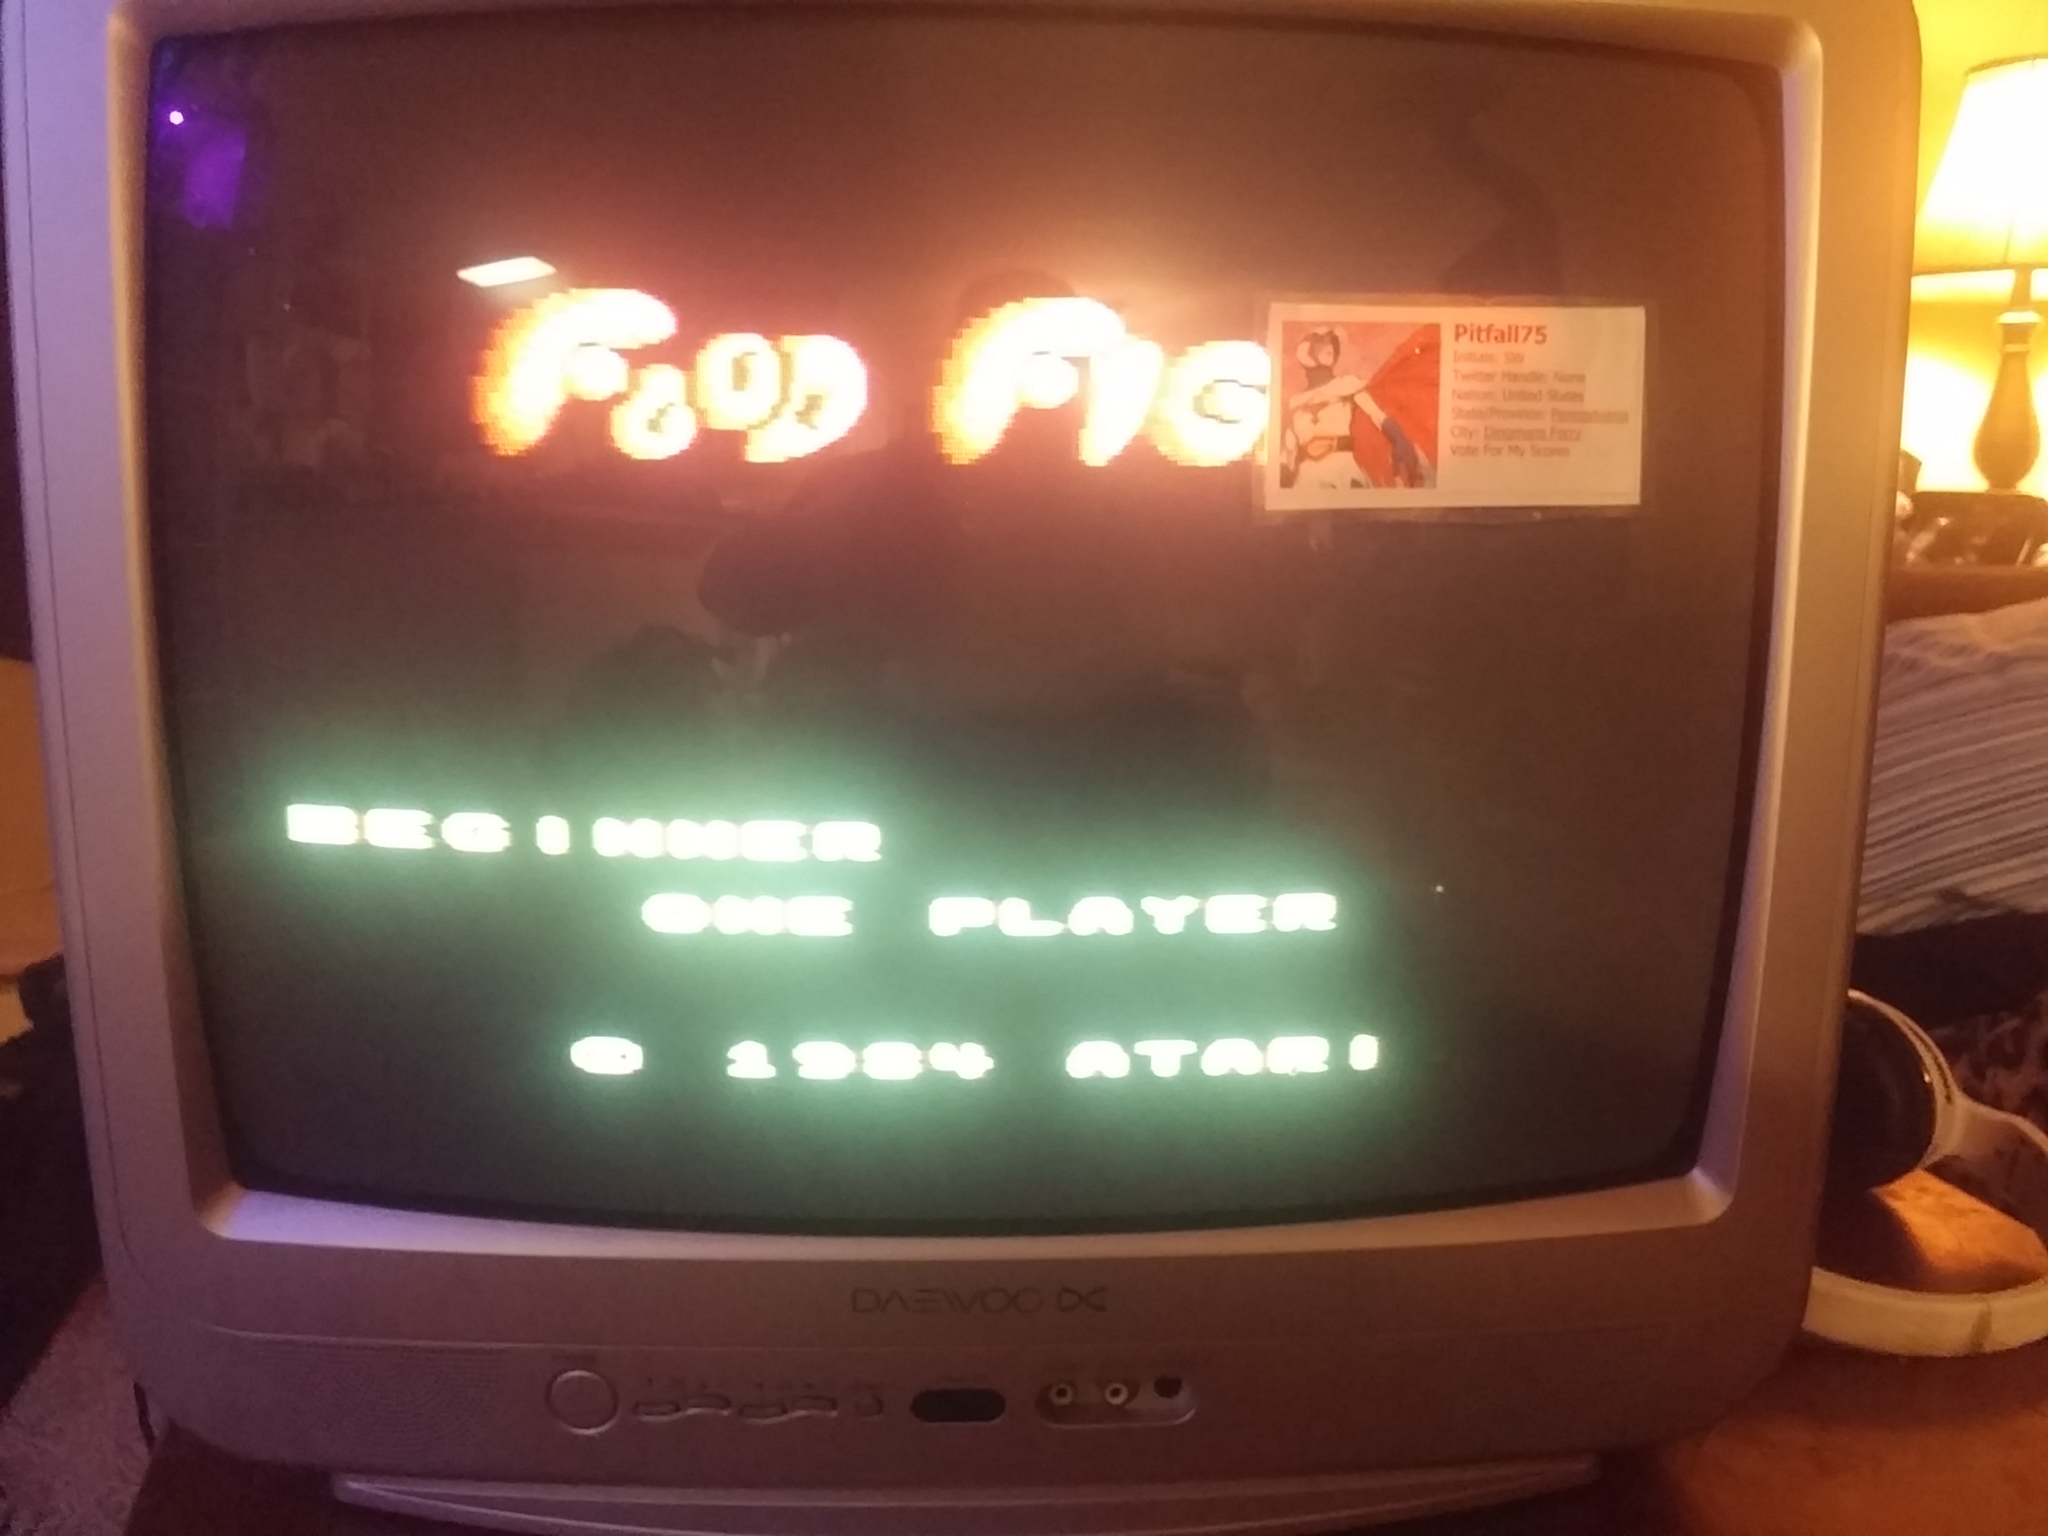 Food Fight: Advanced 348,000 points